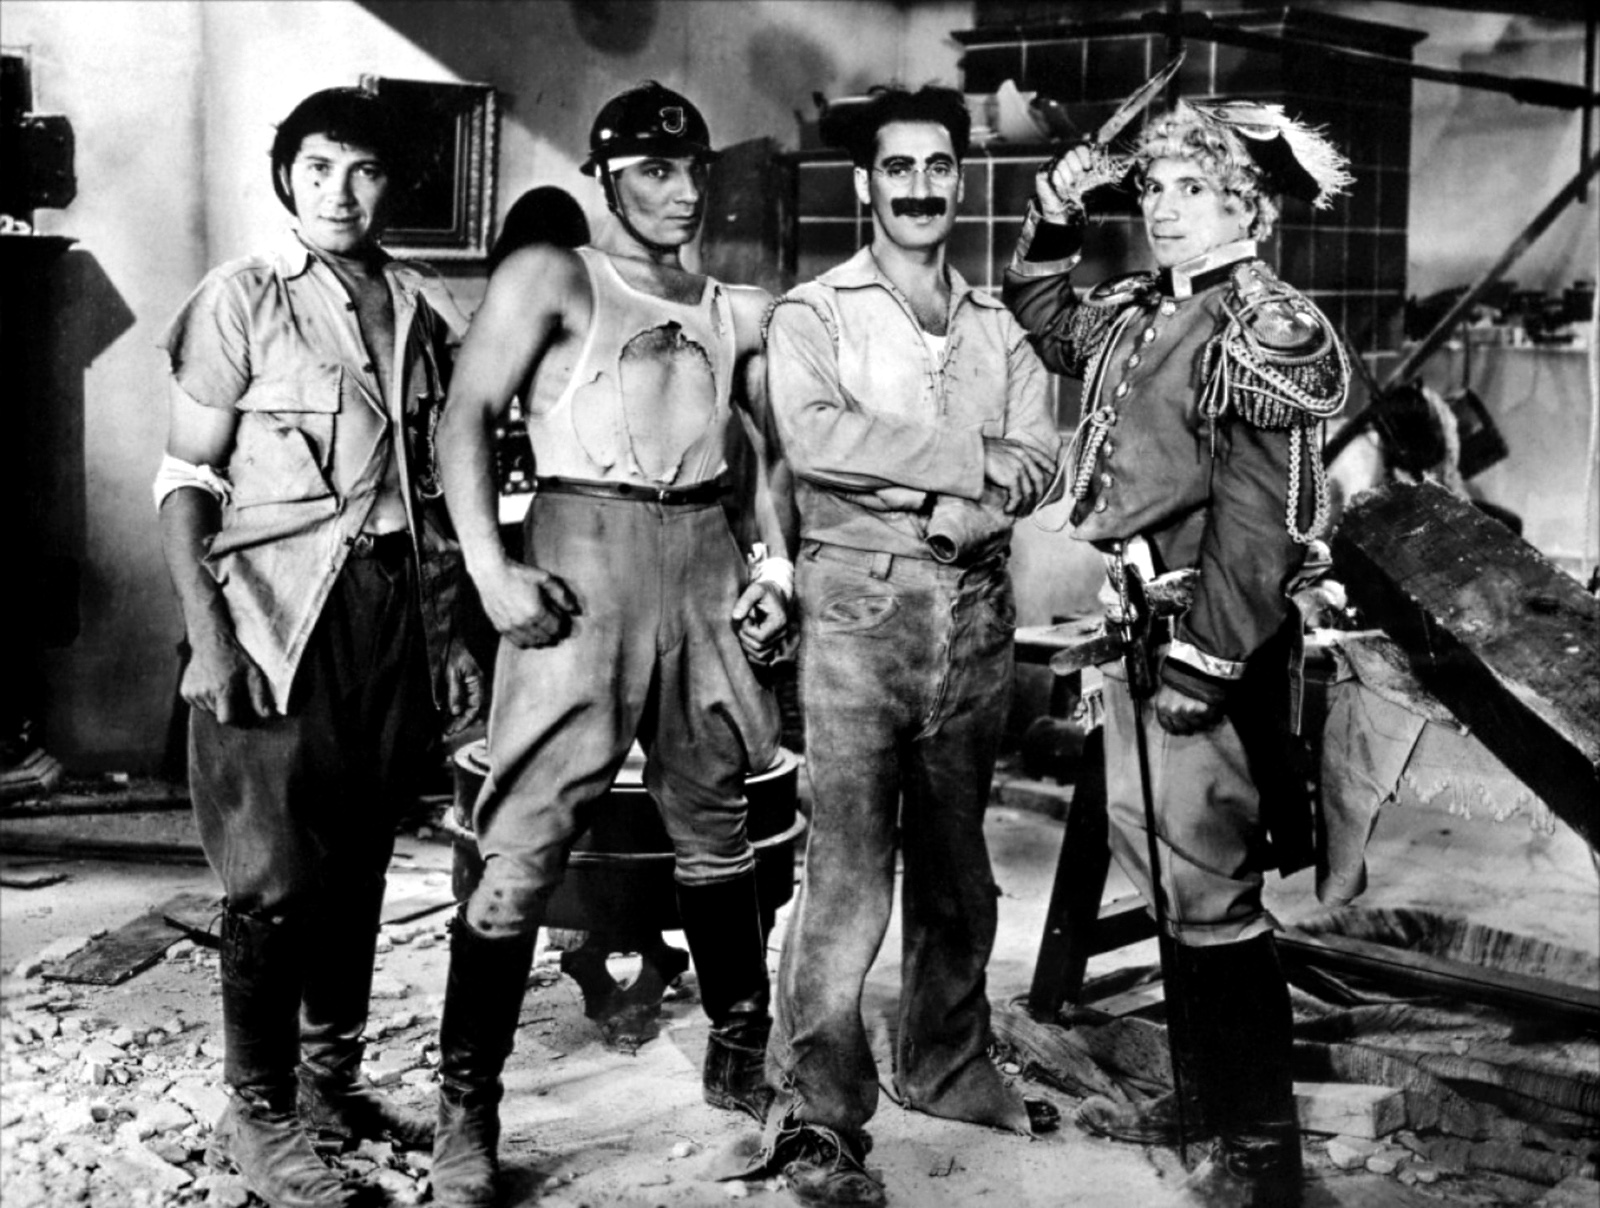 Annex Marx Brothers Duck Soup NRFPT 04 1882440924